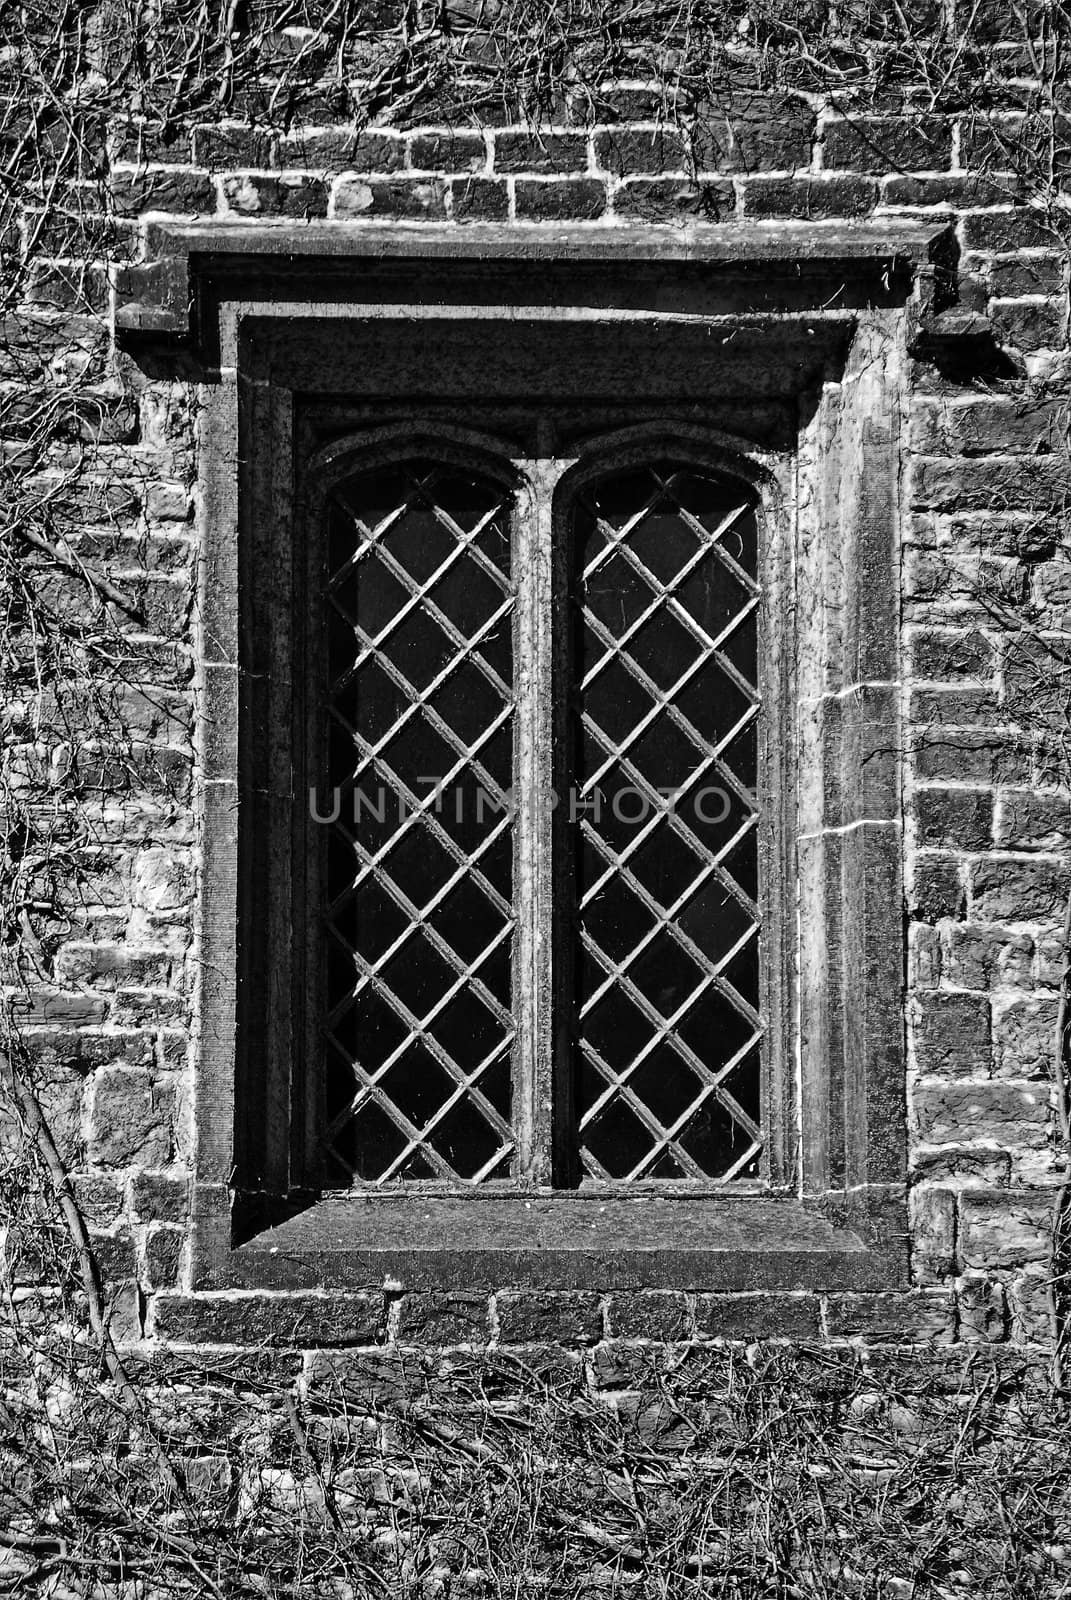 Stone framed medieval window with diamond panes, in a creeper-covered wall (black and white)